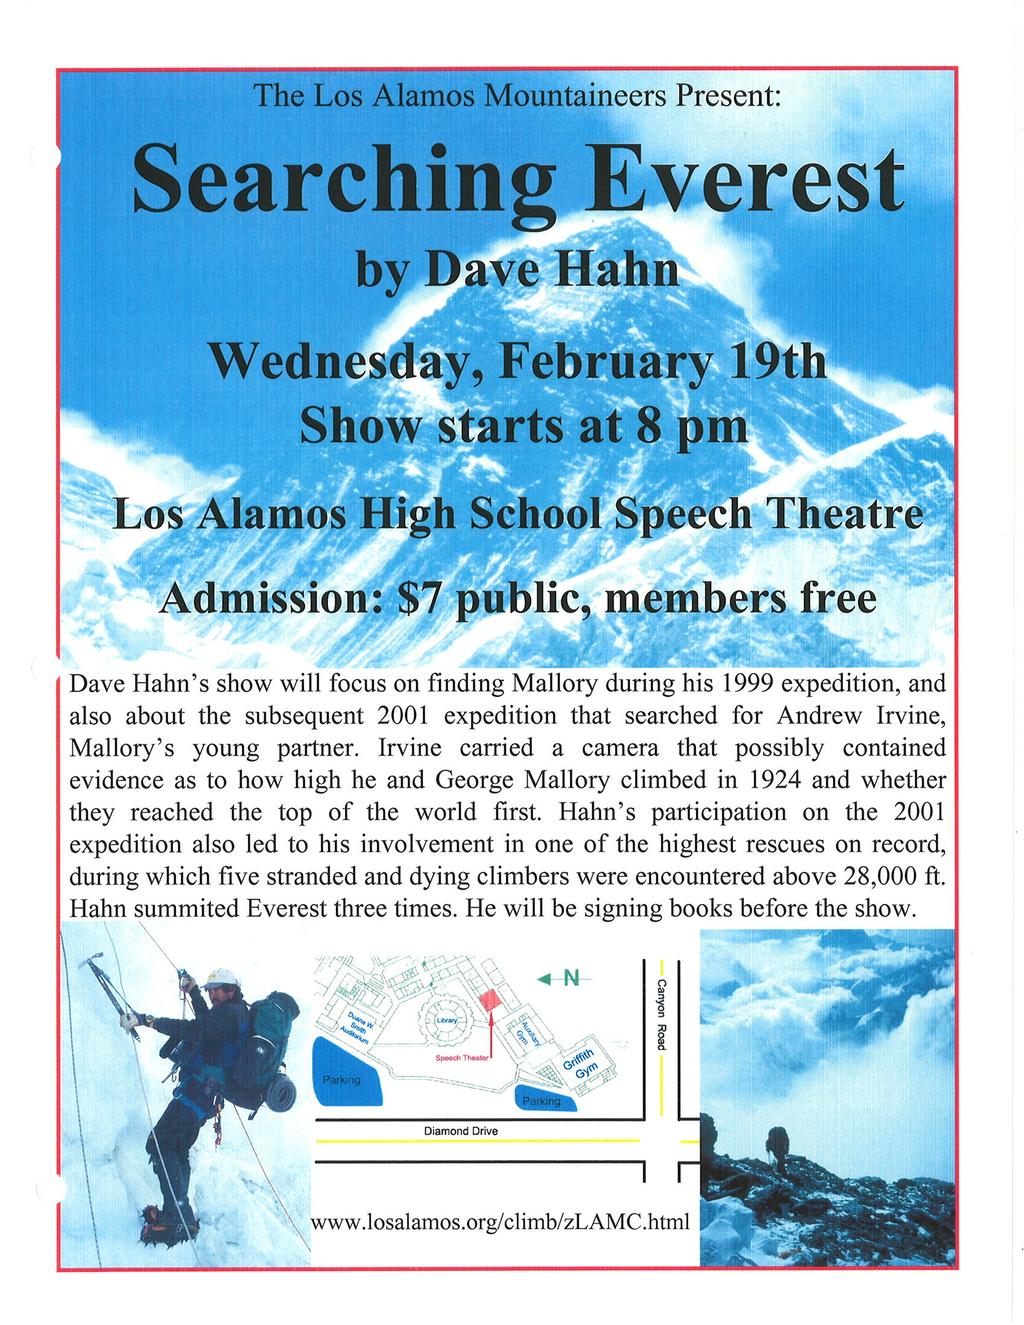 The Los Alamos Mountaineers Present: Searching Everest by l)ave Hahn \ilednesd ùy, February 19th Show starts at 8 pm Los Alamos High Schoot Speech Theatre Admission: $7 public, members free Dave